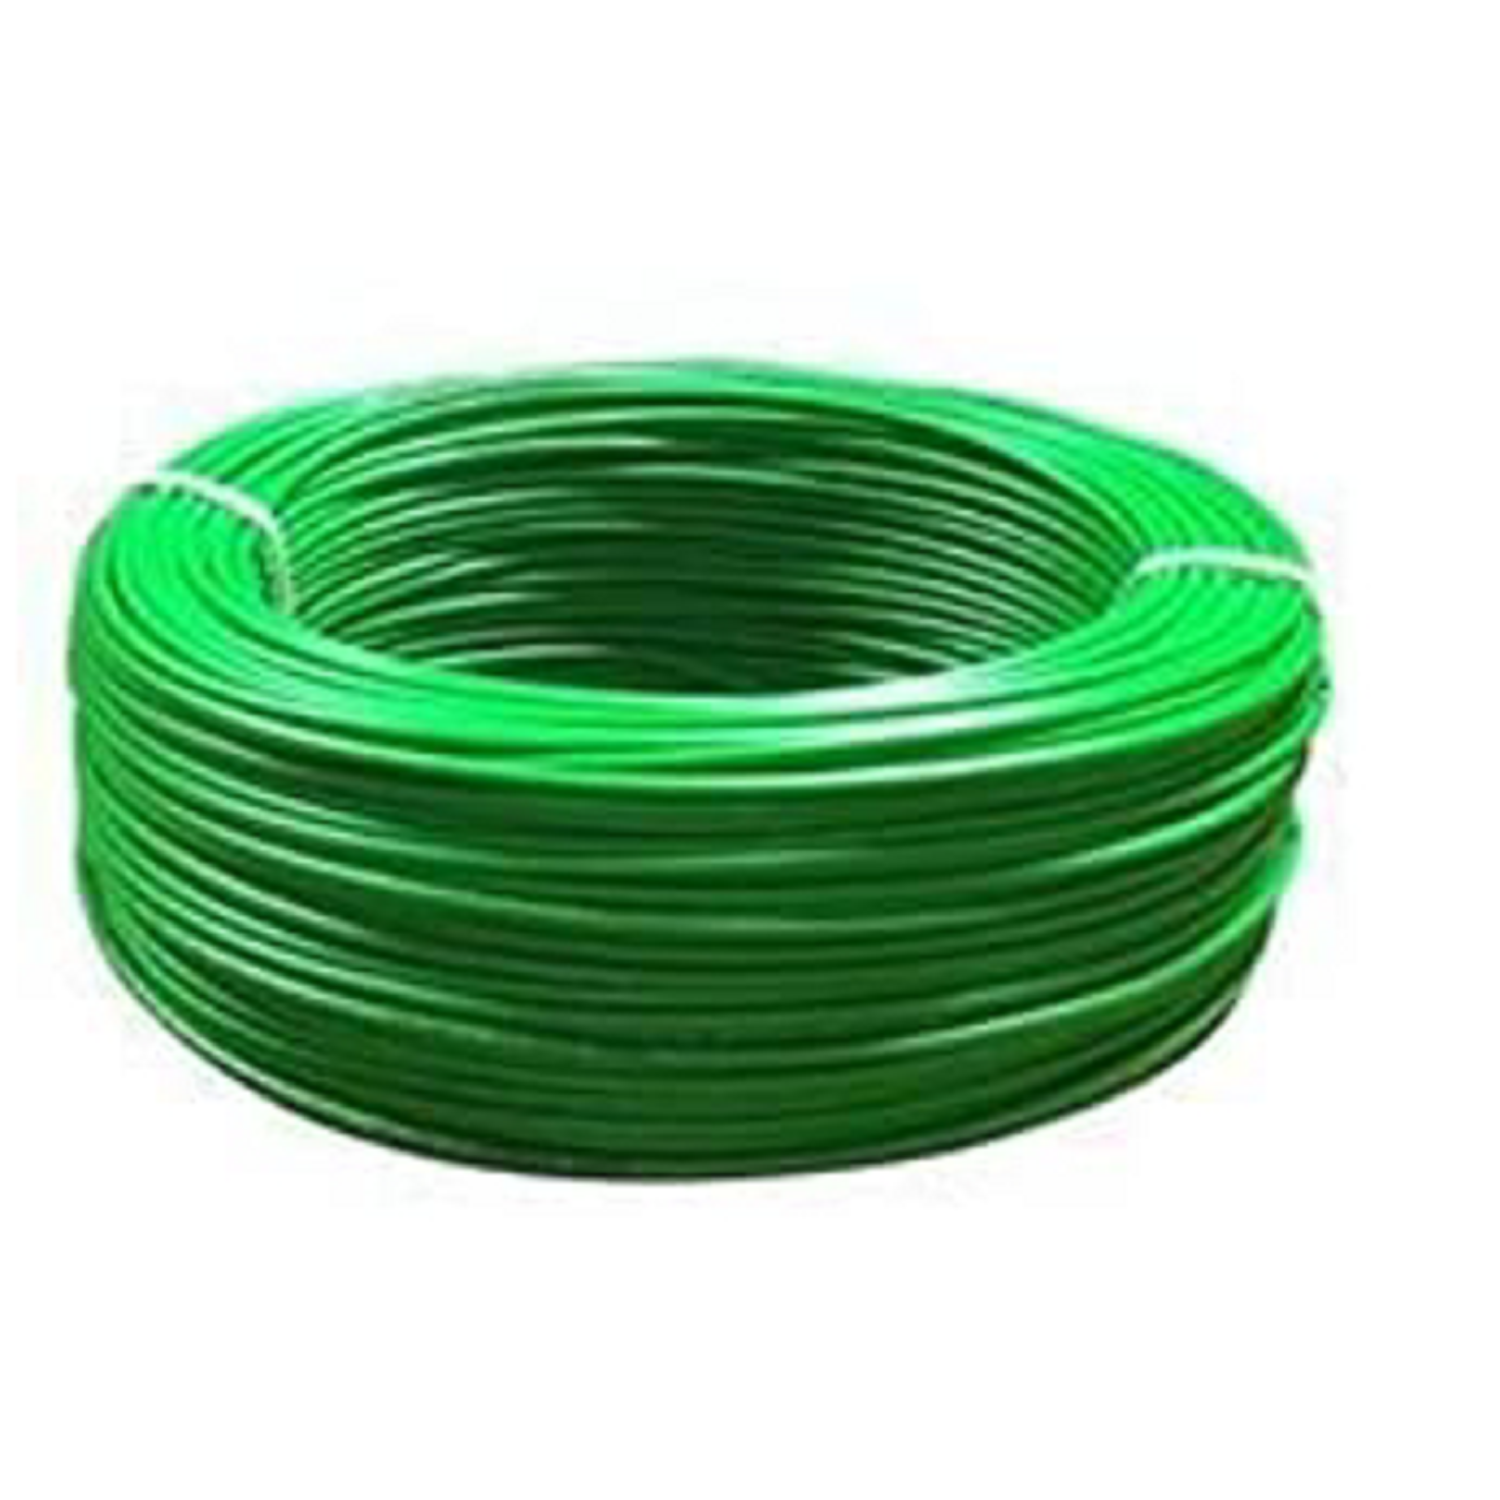 Polycab FR-LS 0.75 SQ-MM, (300 Meters) PVC Insulated Copper Wire Single Core (Green)